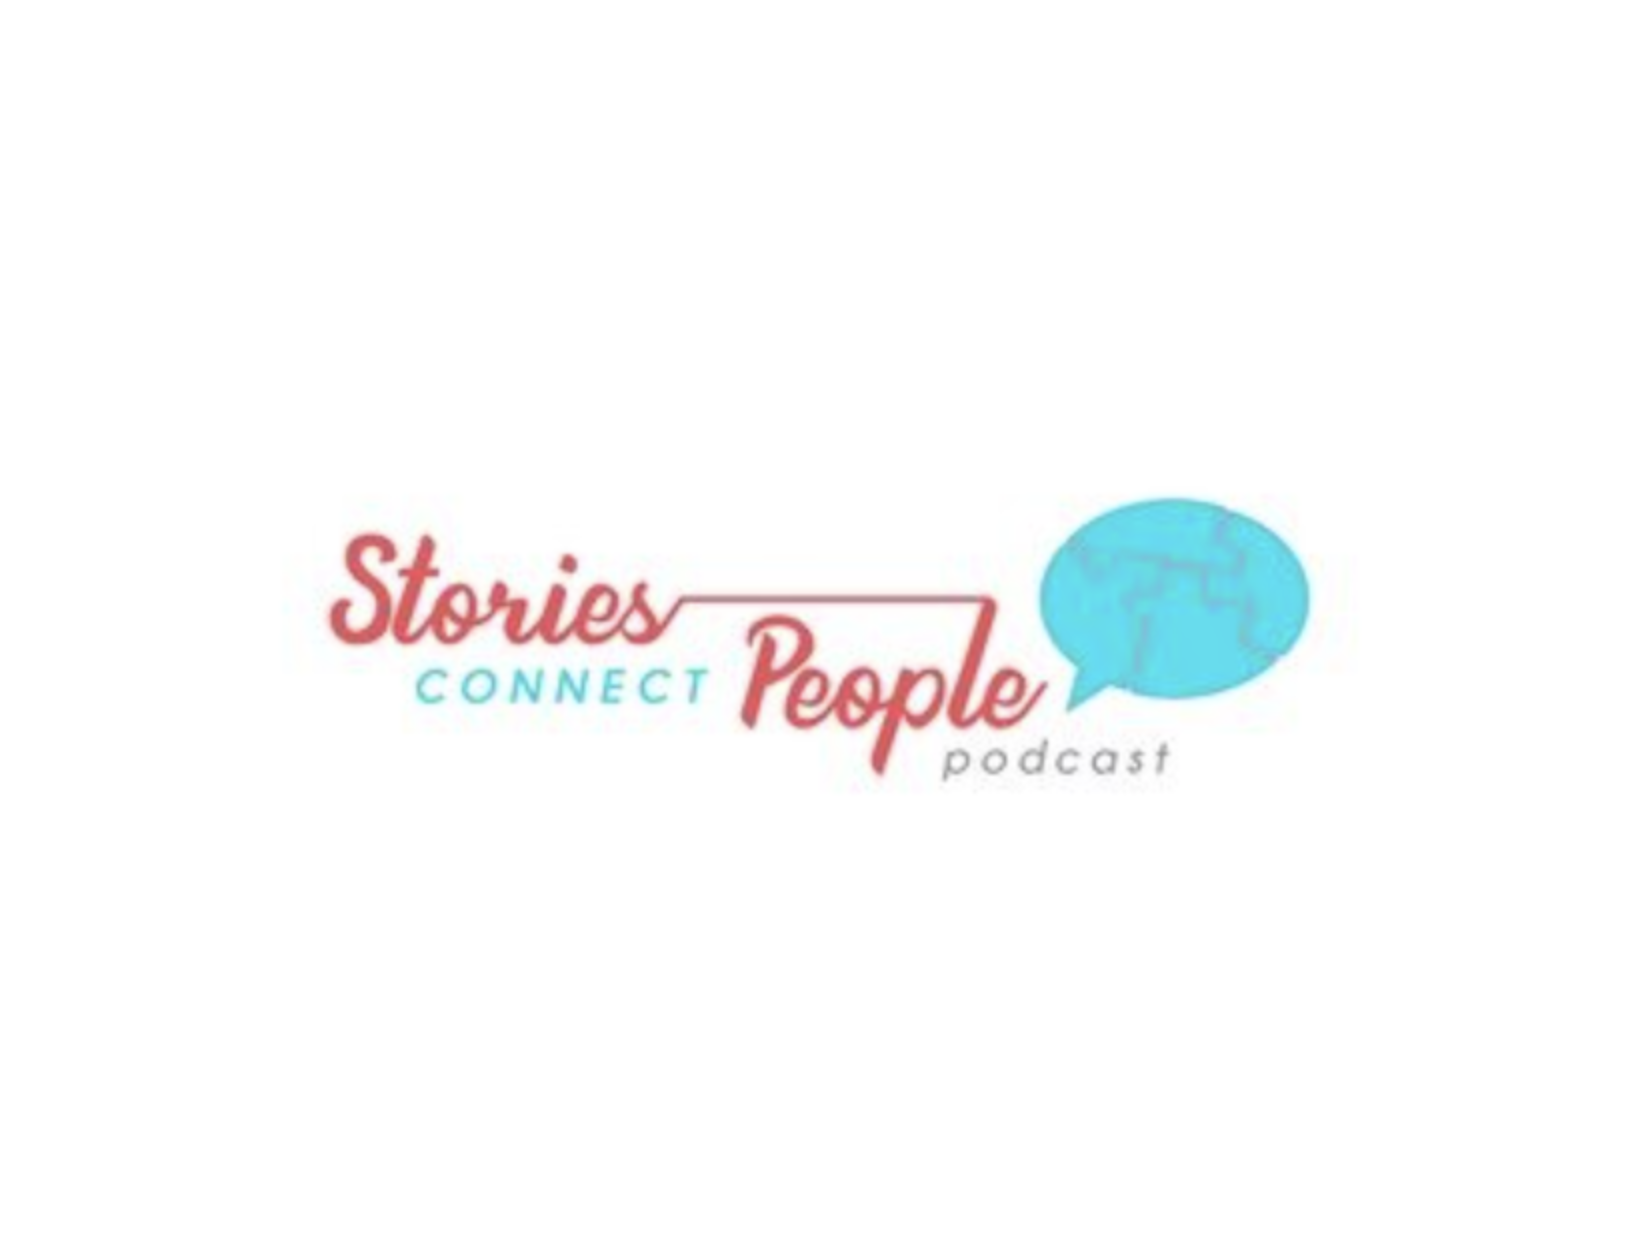 Stories Connect People, November 2020